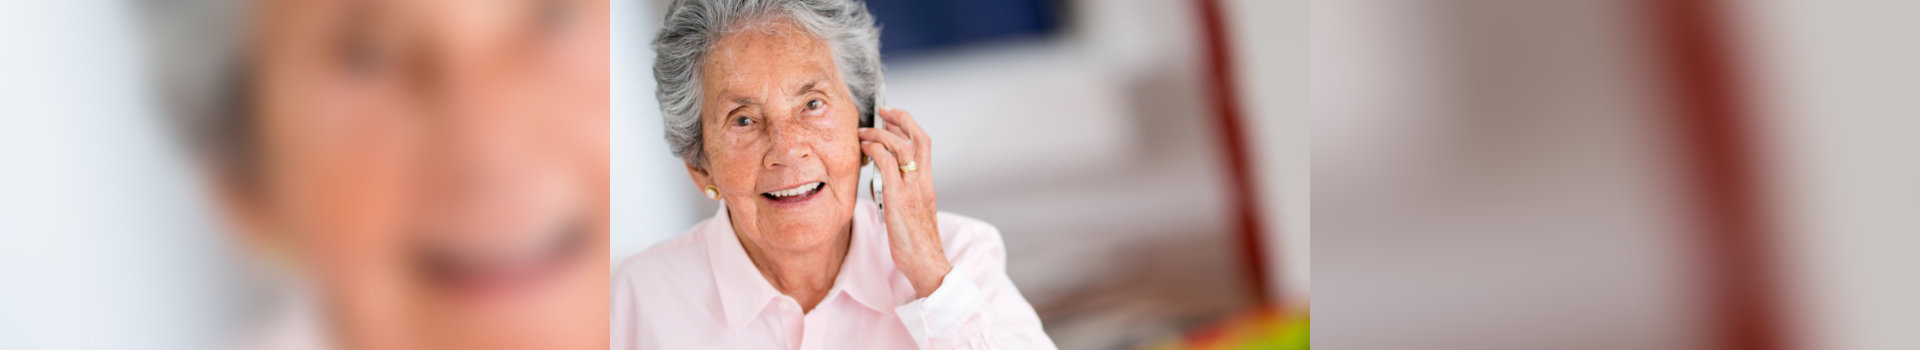 old woman calling someone using her mobile phone